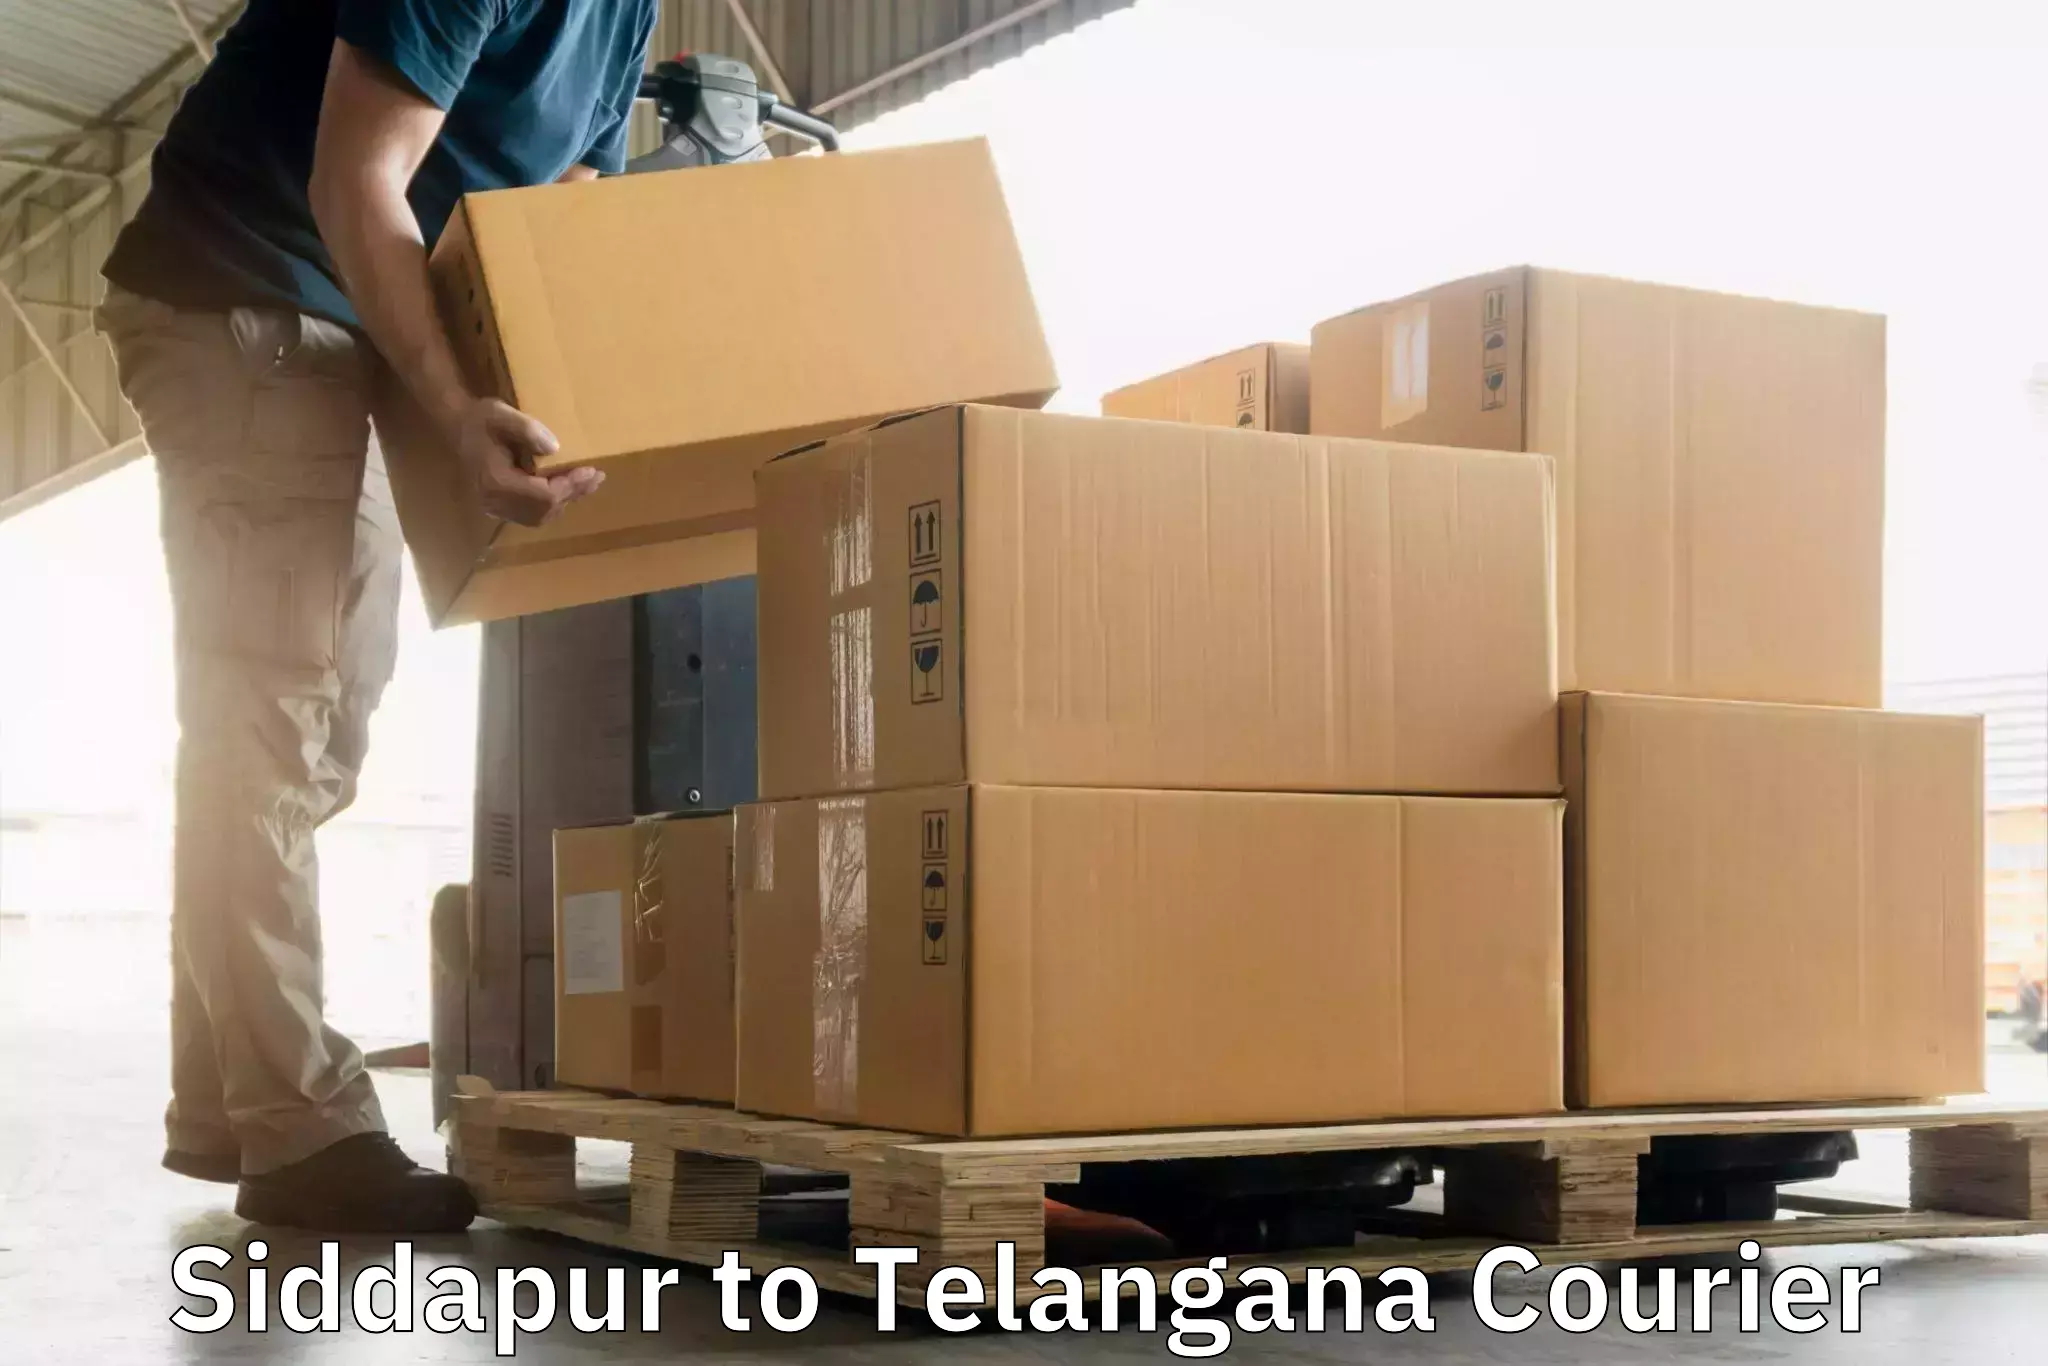 Flexible delivery schedules in Siddapur to Telangana